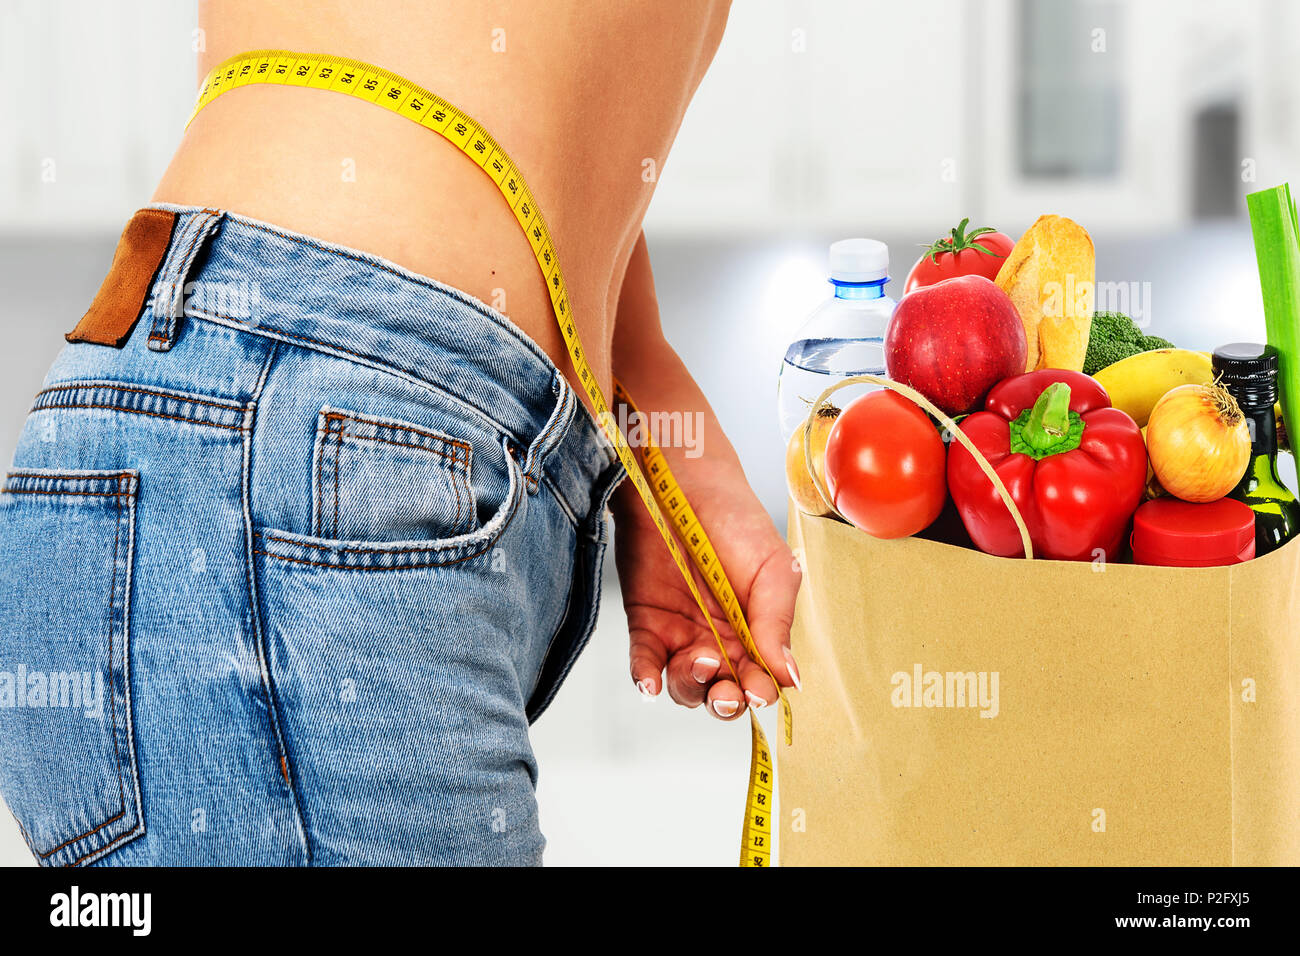 Healthy eating concept - woman in blue jeans measures her perfect waistline with a measuring tape next to a bag of dietetic food in the kitchen (mixed Stock Photo